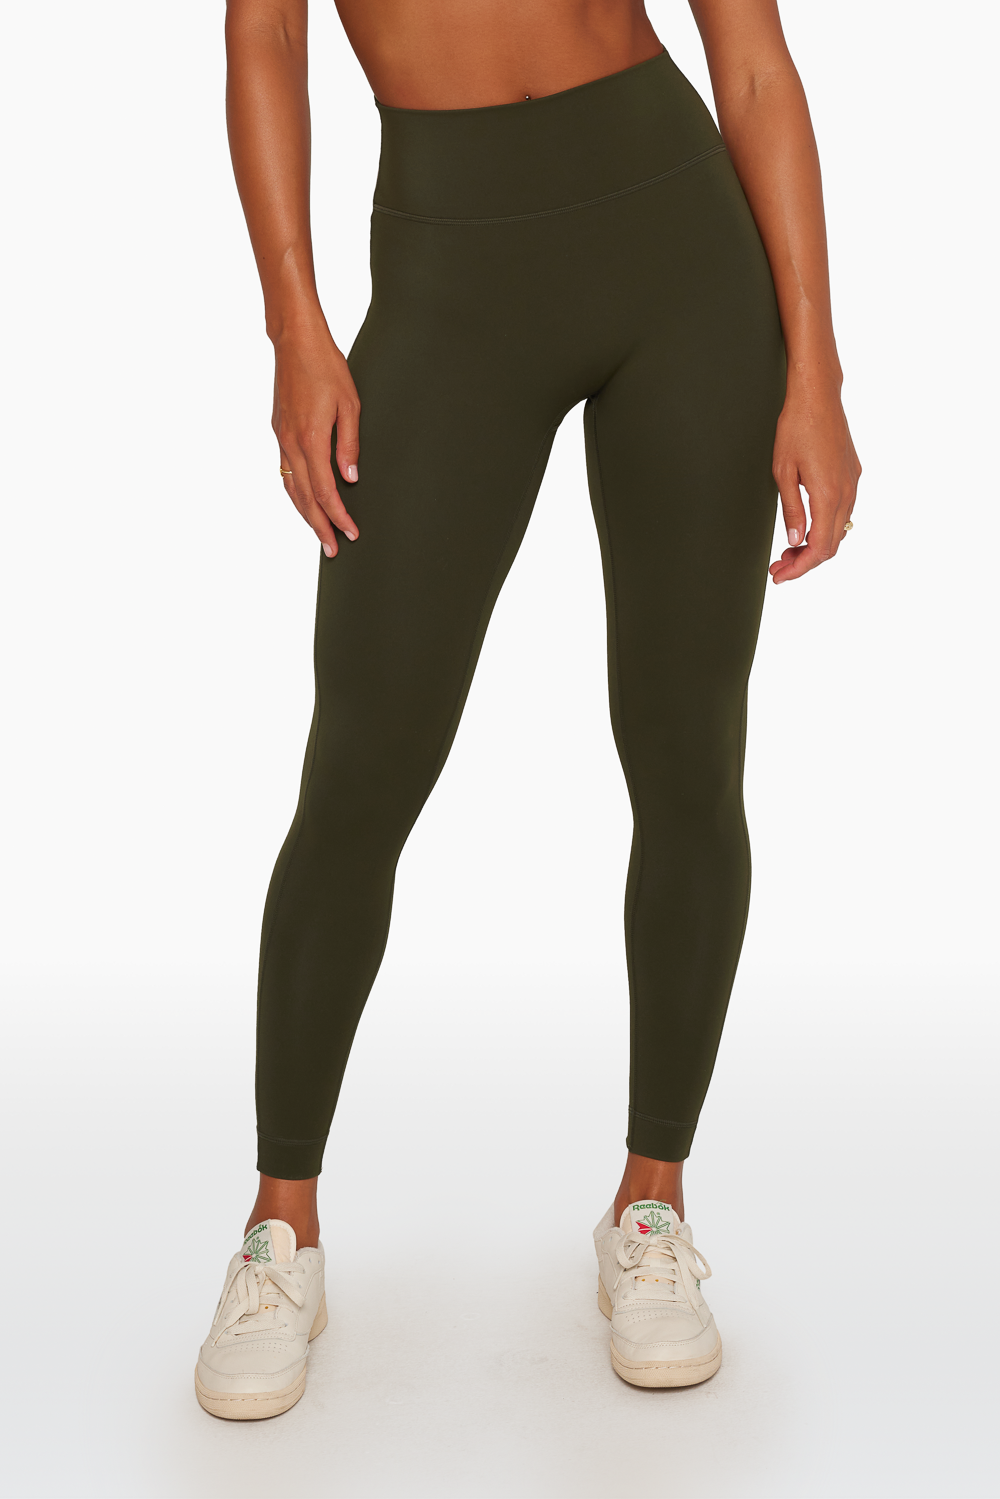 SPORTBODY® LEGGINGS - AFTER HOURS